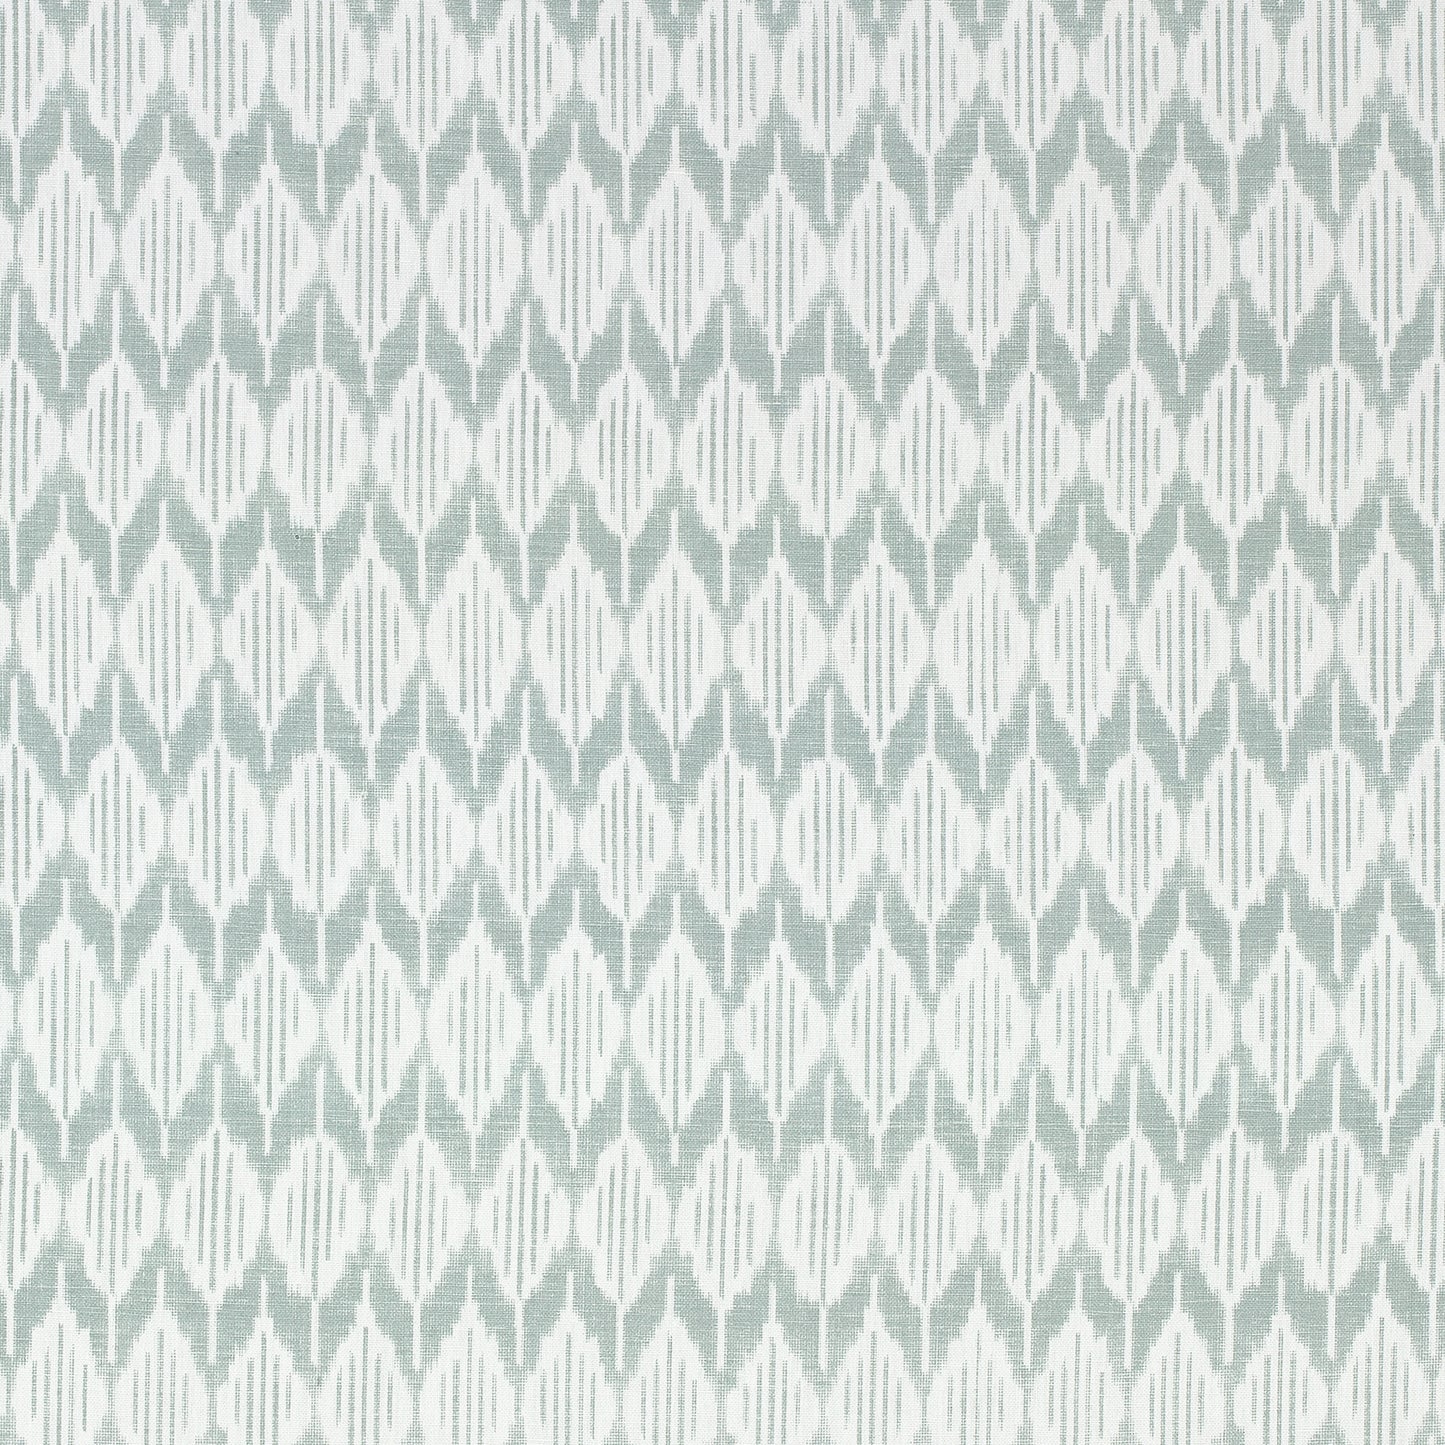 Purchase  Ann French Fabric Product# AF73022  pattern name  Balin Ikat